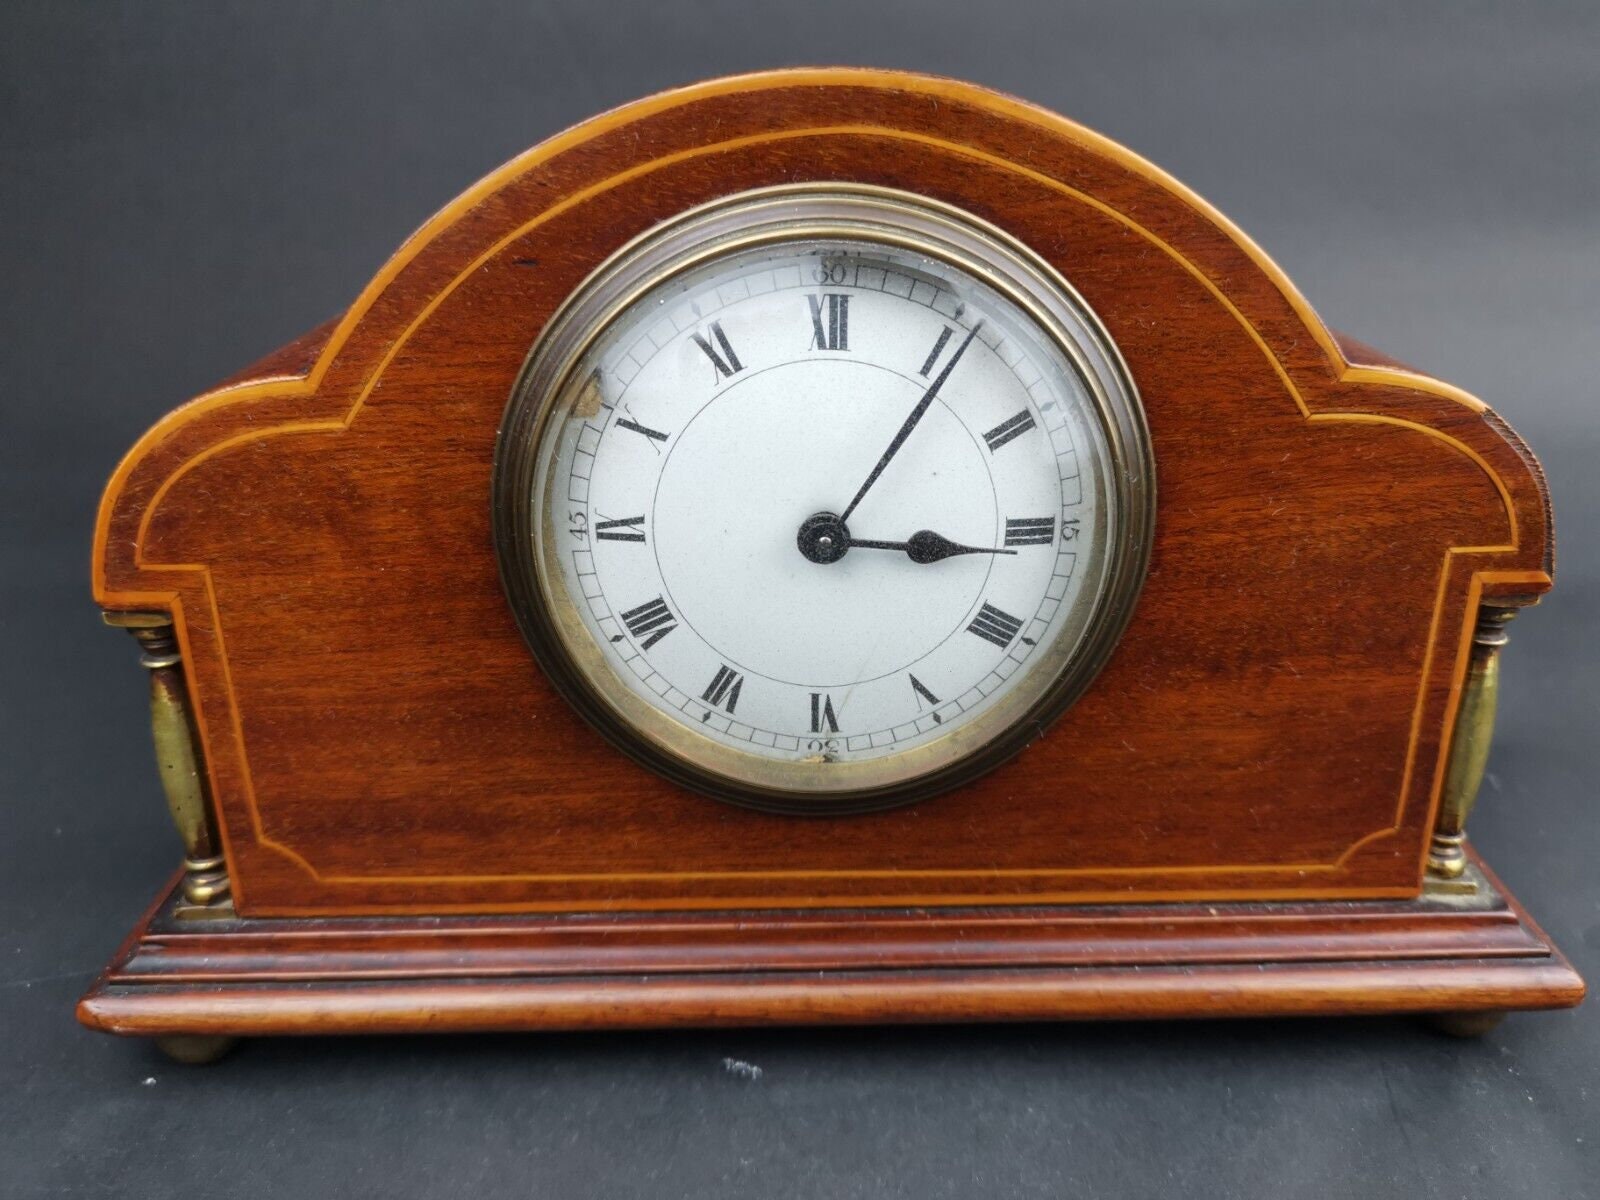 A Small Edwardian Inlaid Mantle Clock